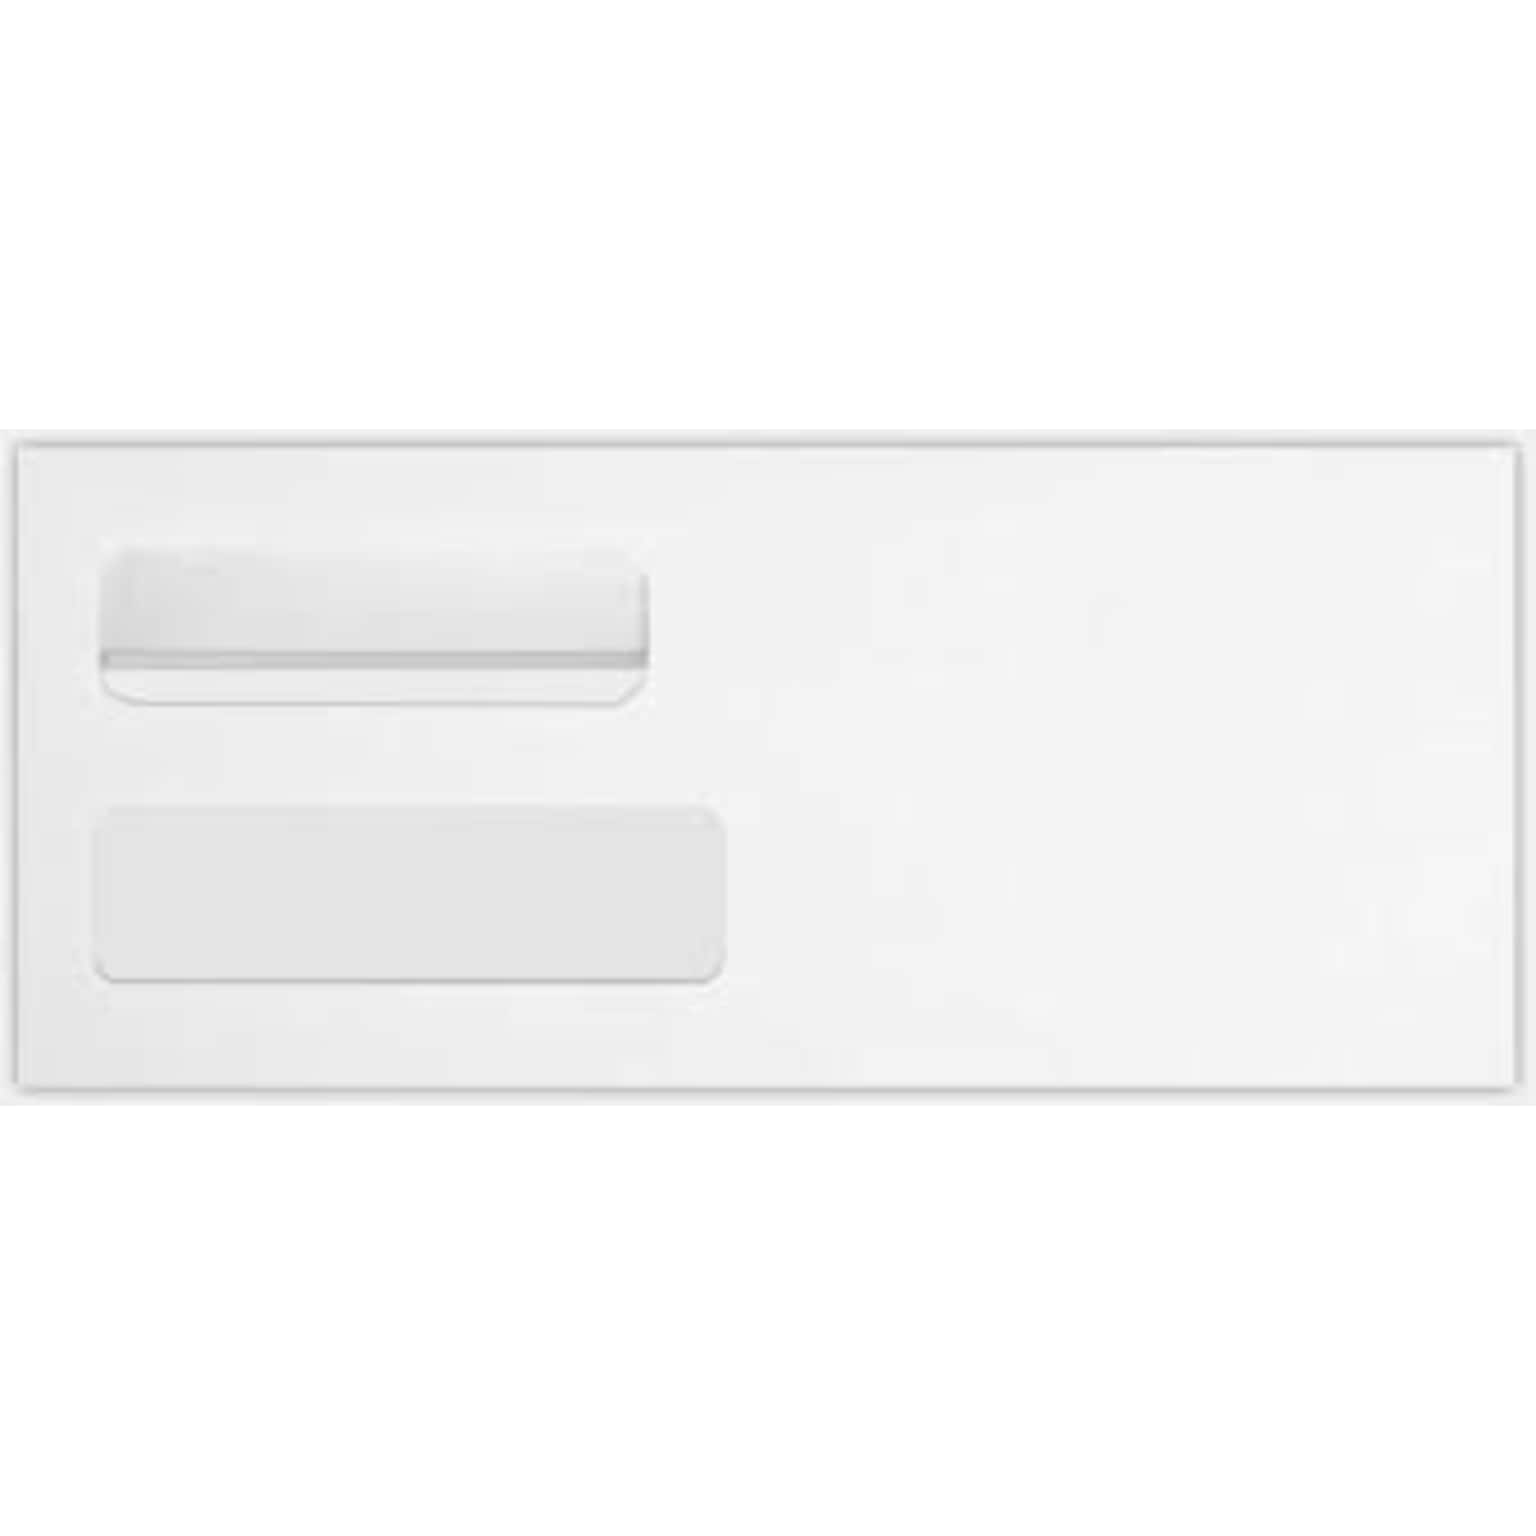 Quality Park Redi-Seal Self Seal #10 Double Window Envelope, 4 1/2 x 9 1/2, White Wove, 1000/Pack (24559-QP-1000)